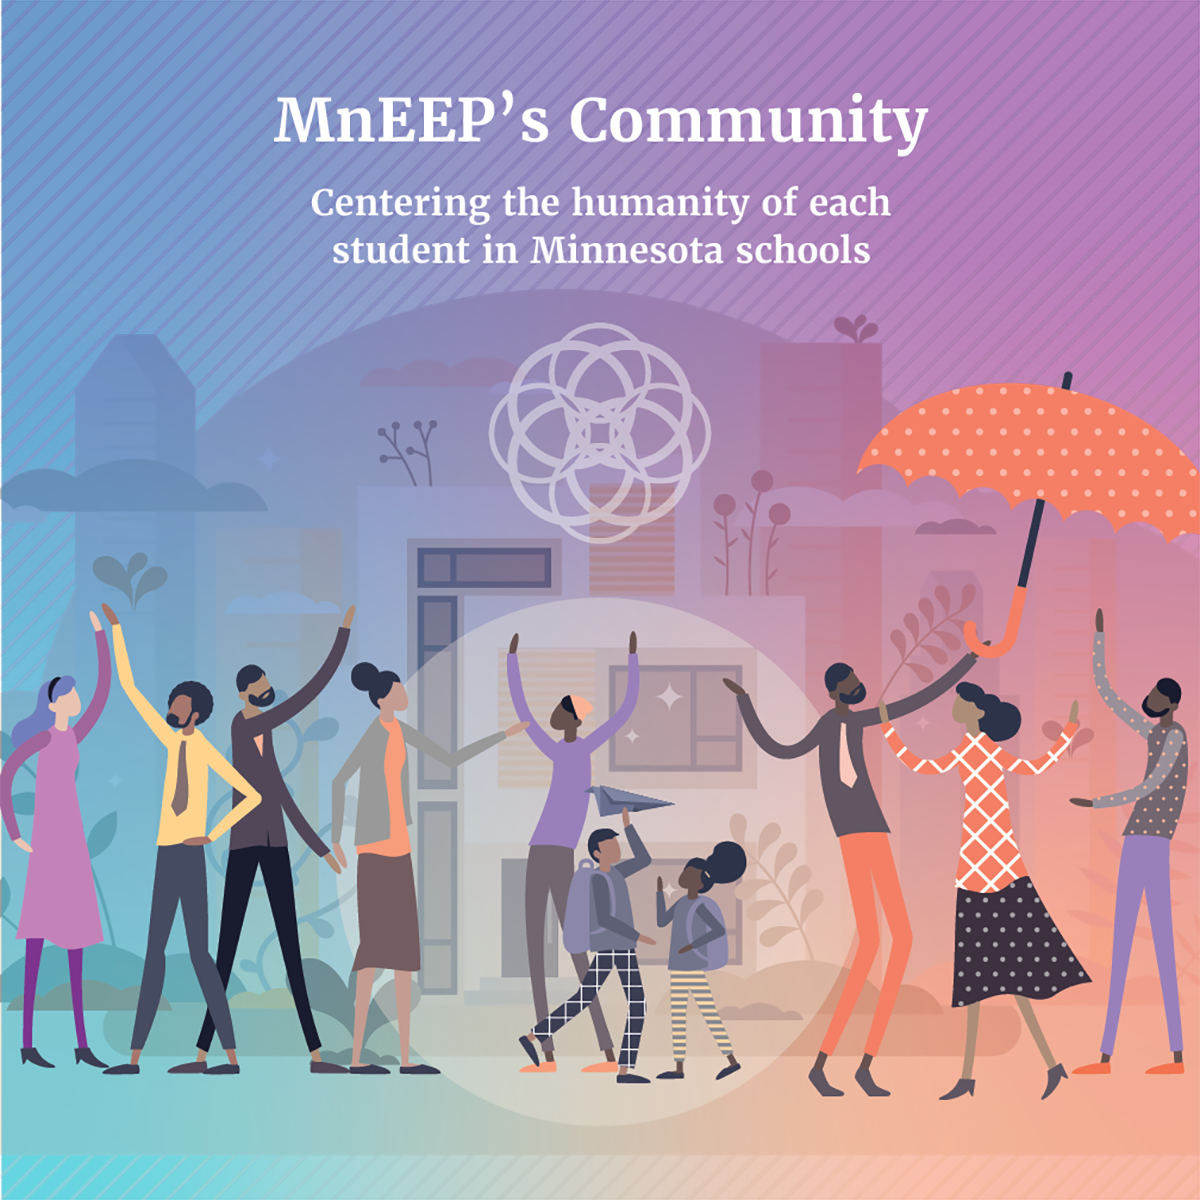 Mneep's community - centering the humanity of each student in Minnesota schools